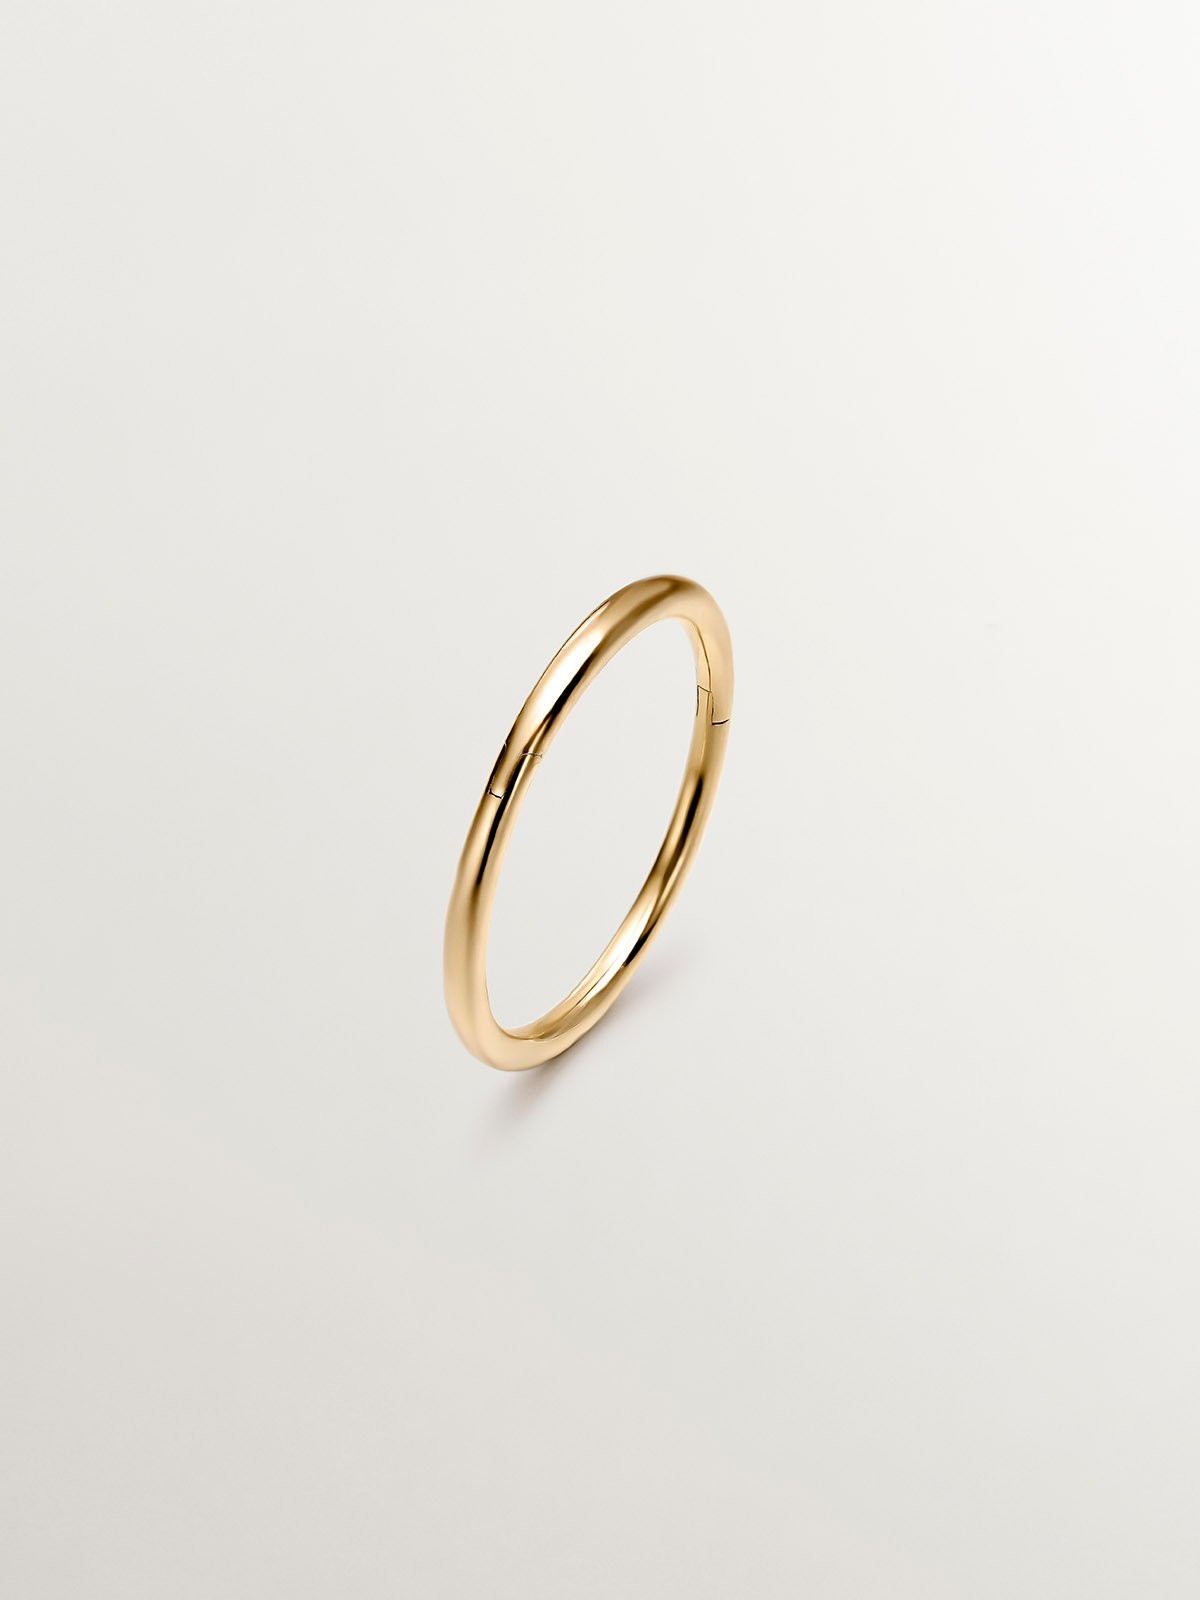 Small individual 9K yellow gold hoop earring